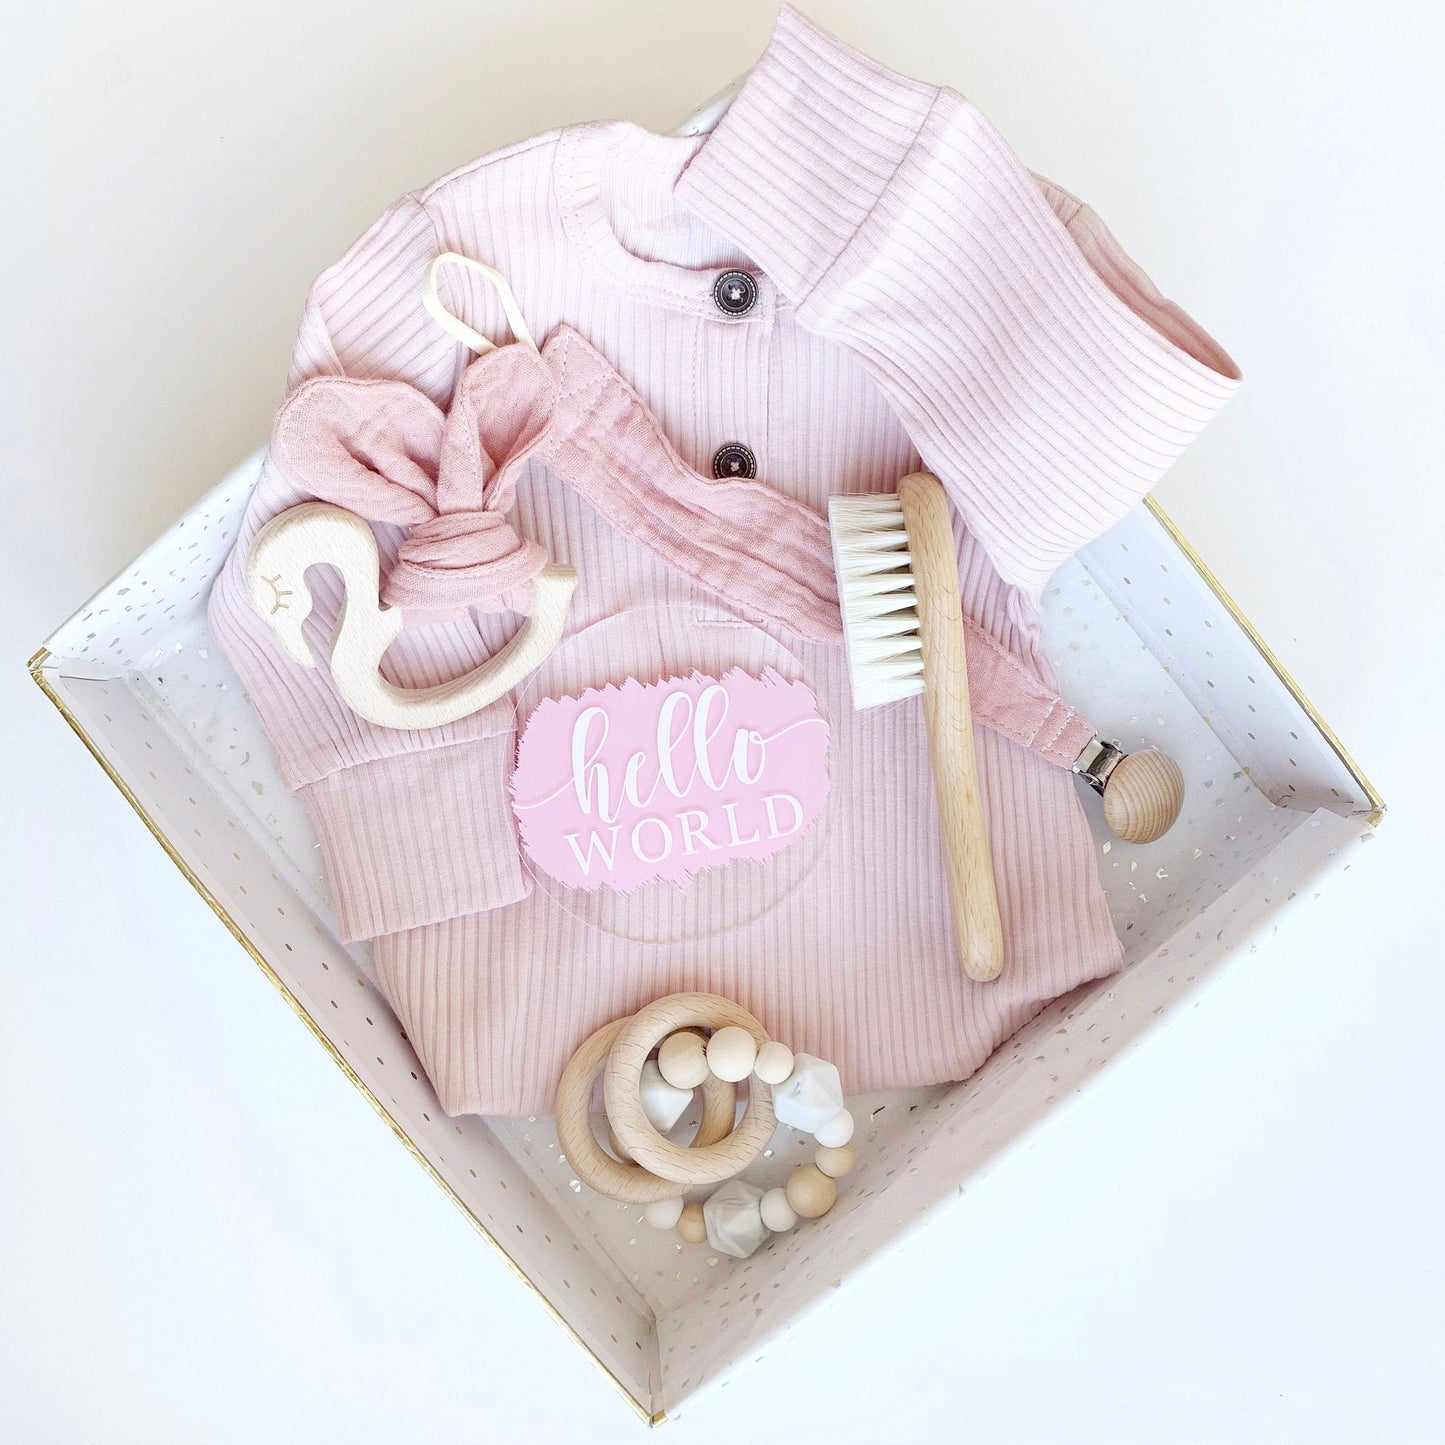 Baby Girl Gift Personalized, Box Set, Pink Baby Shower Gift basket, Custom Name hat, Going home outfit, flamingos, Custom Girl Clothing Gift.